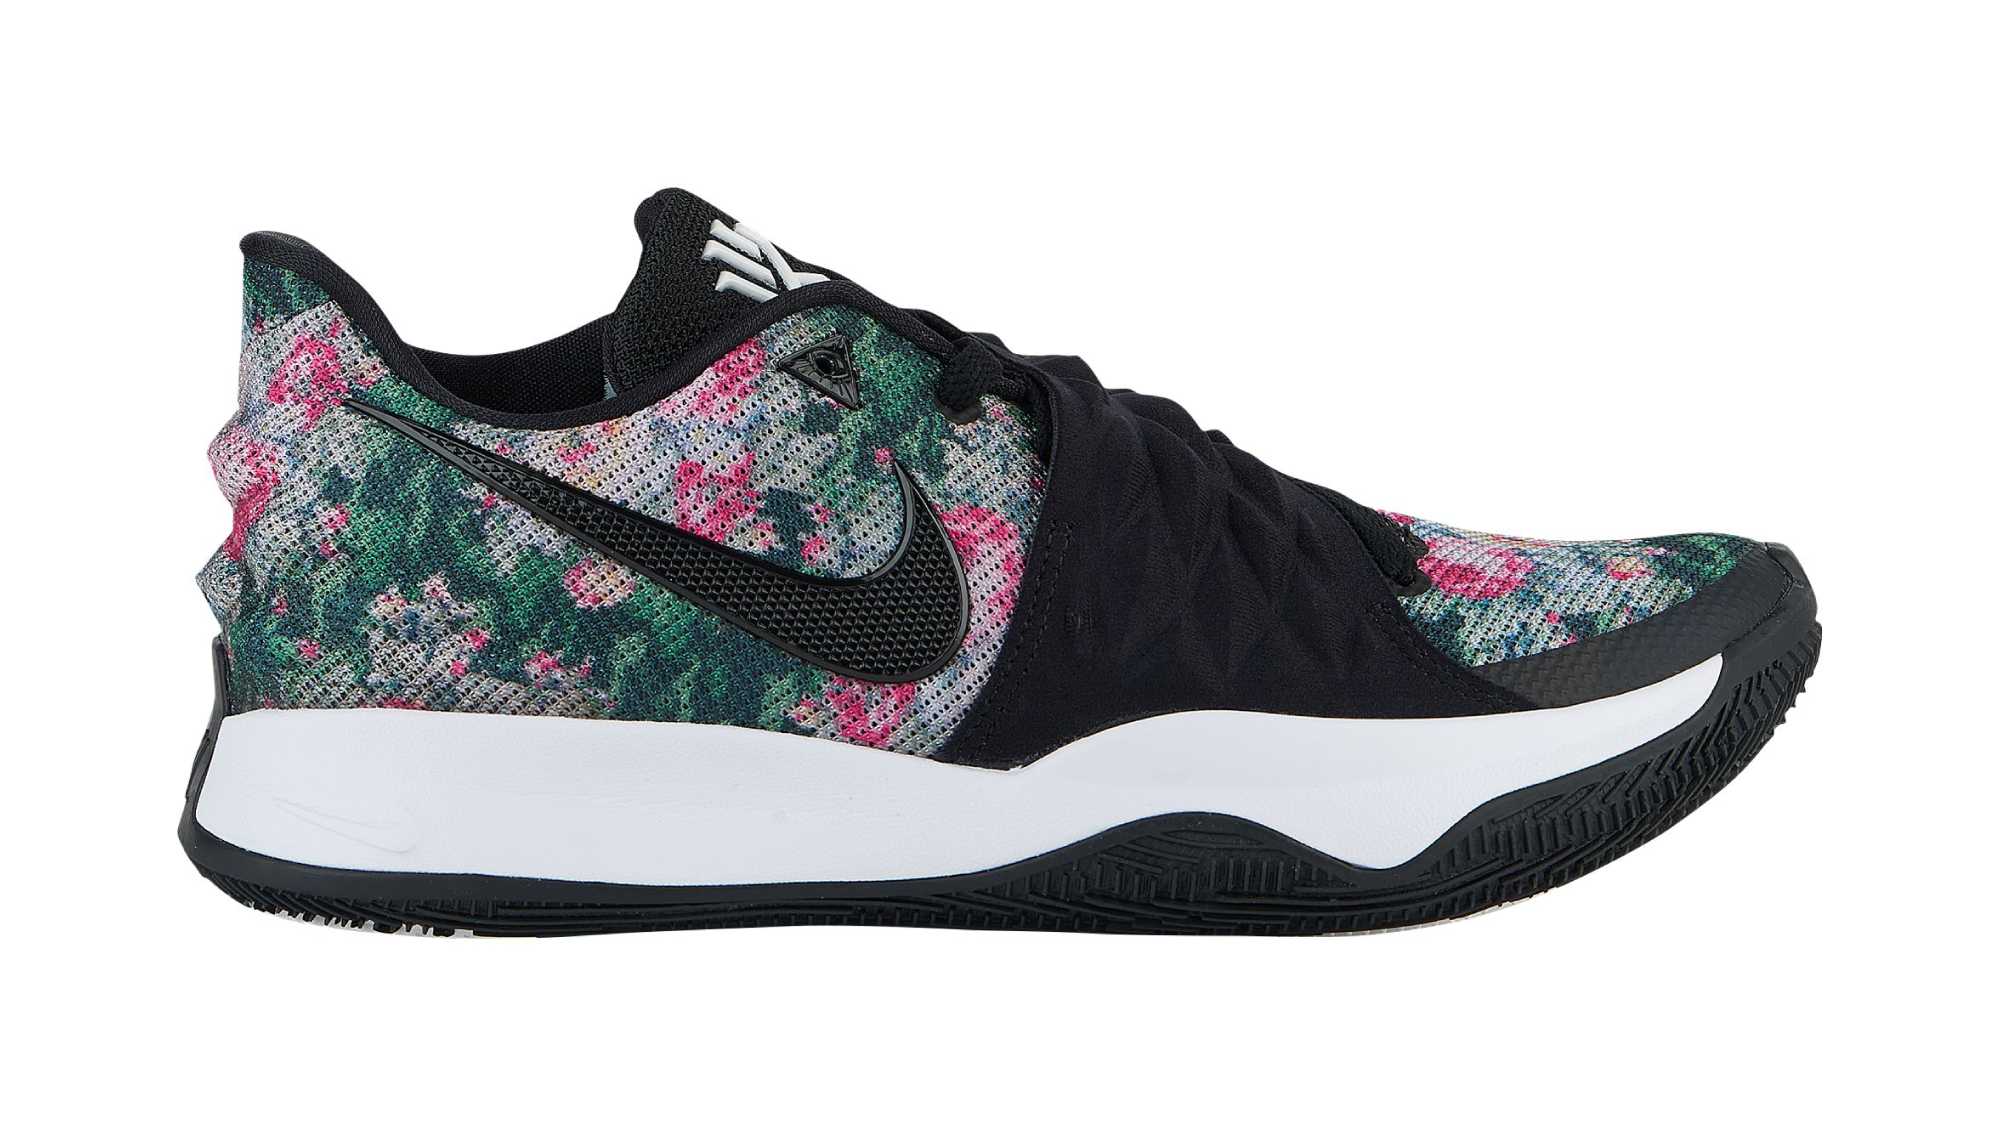 Nike Kyrie Low 'Floral' AO8979-002 